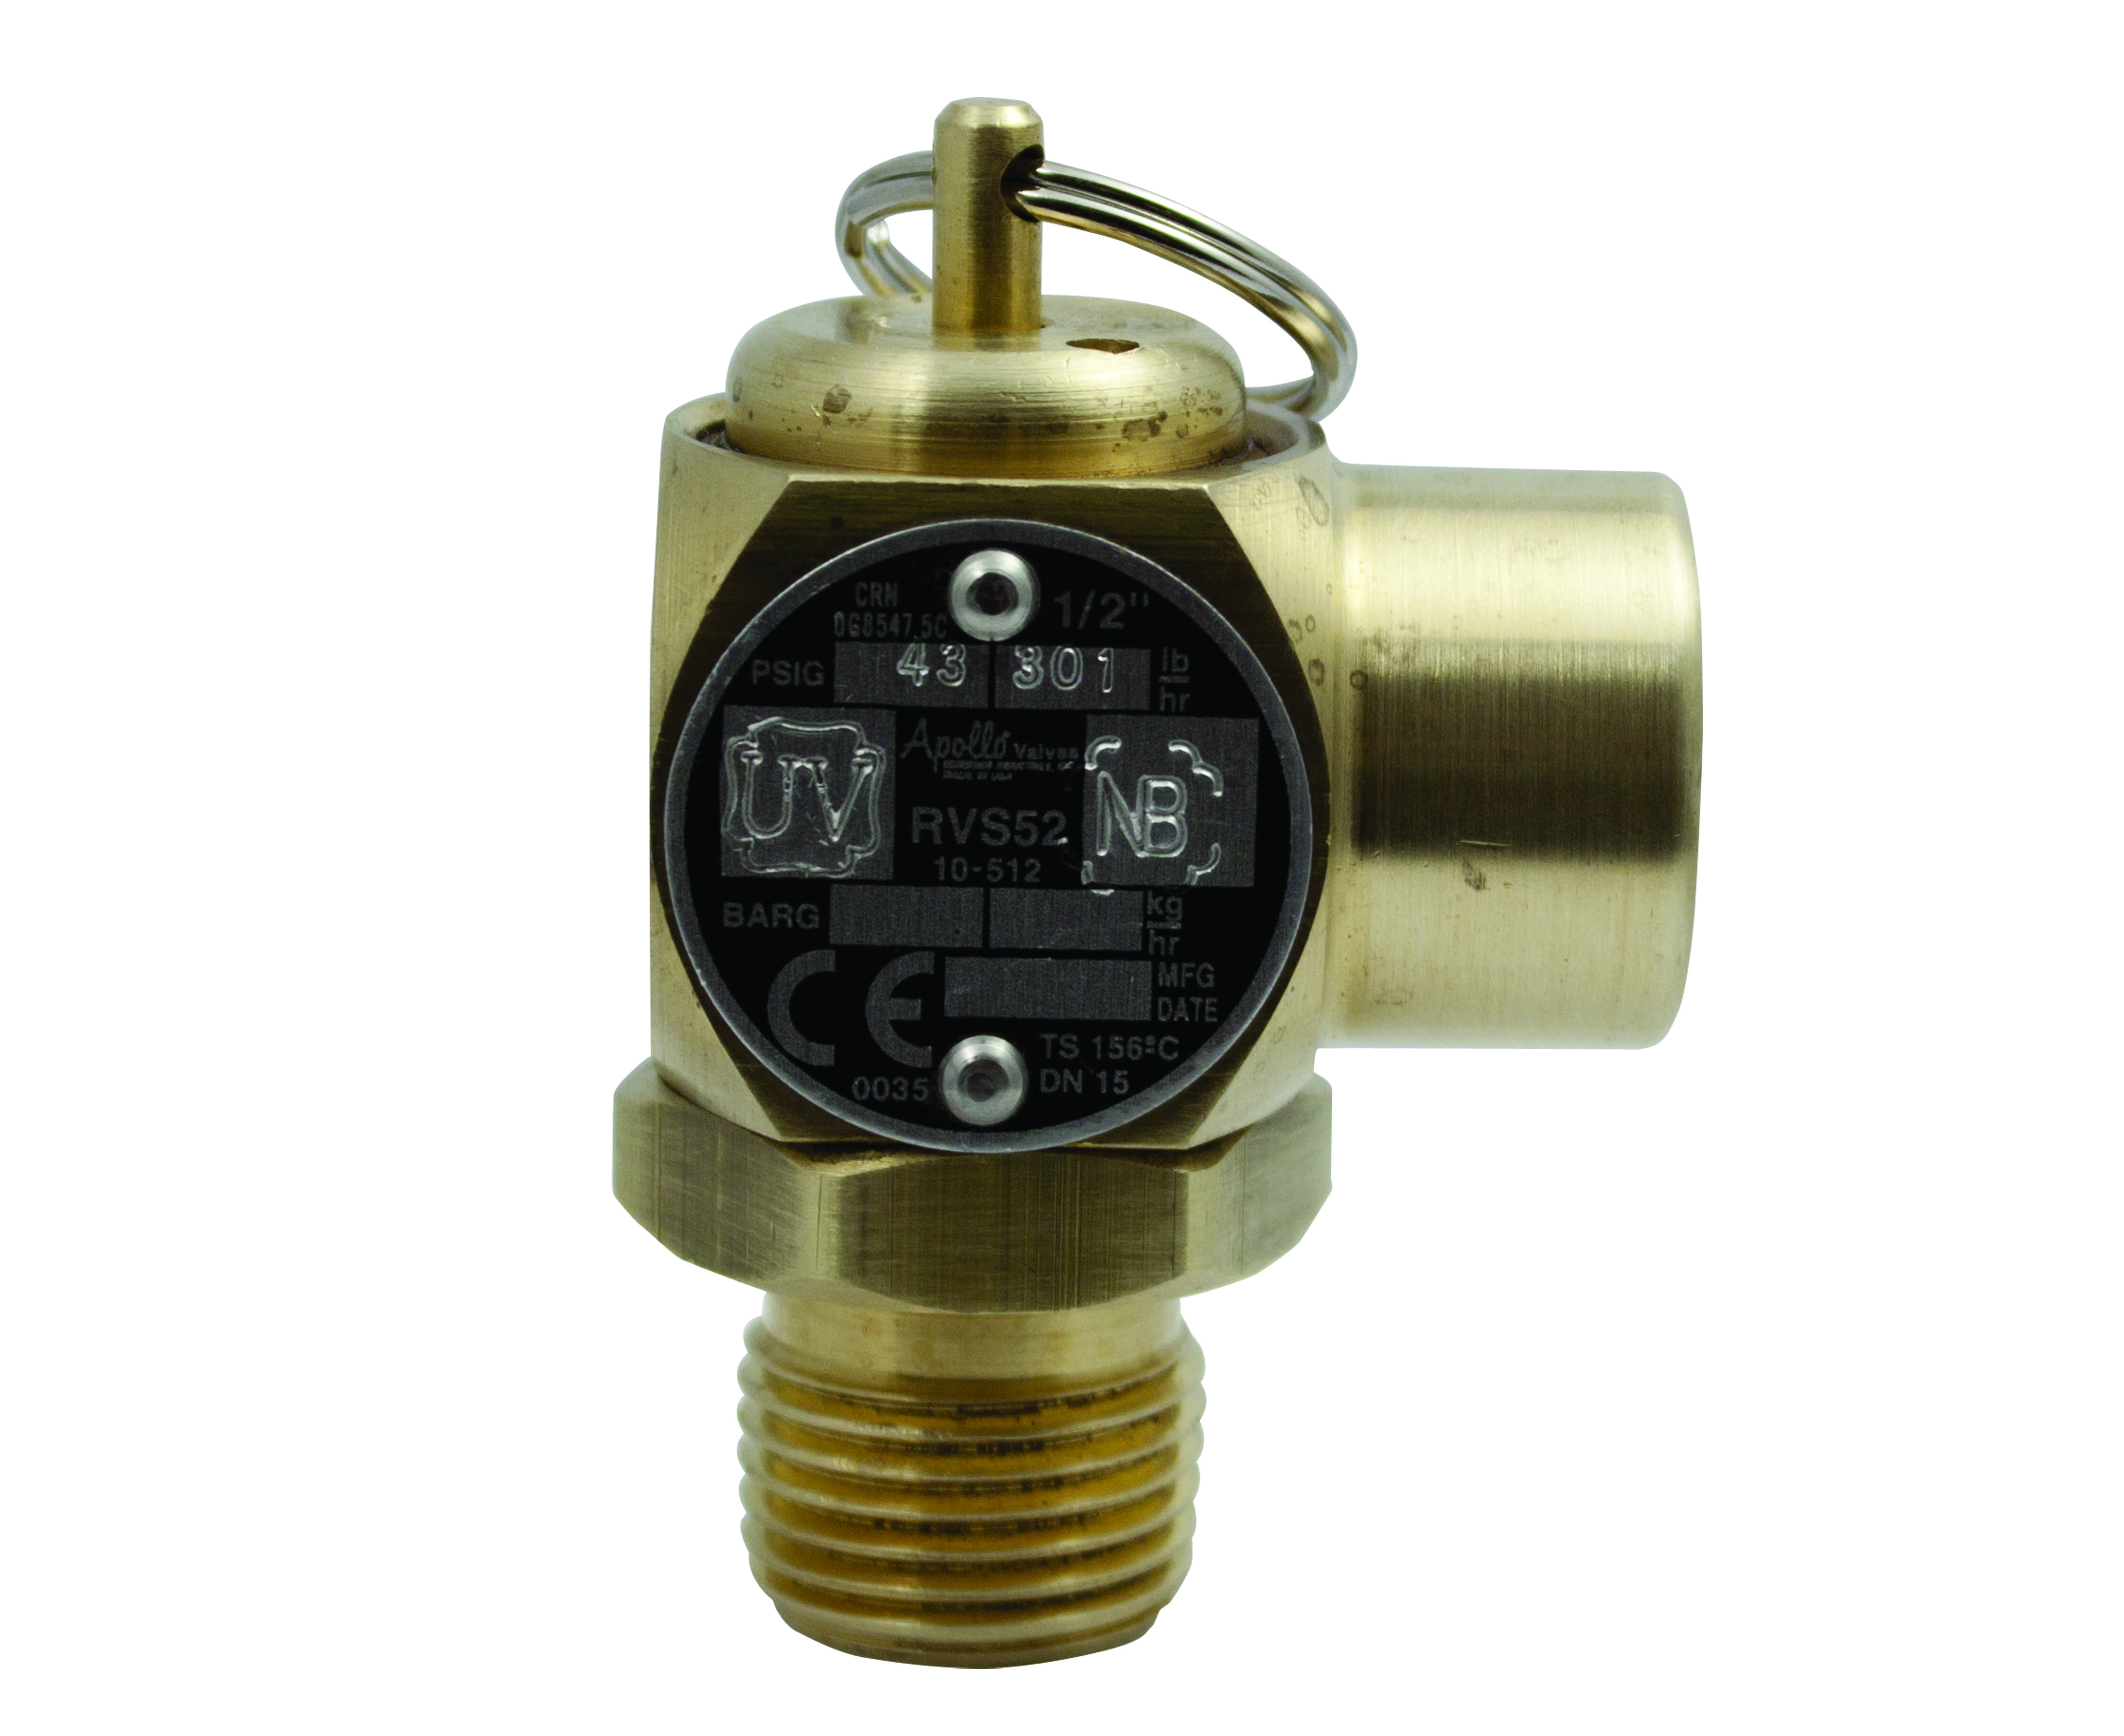 Preview image for Apollo ASME Sec VIII Steam Compact Brass Safety Relief Valves with Satin Chrome Finish, Test Report (MNPT x FNPT)